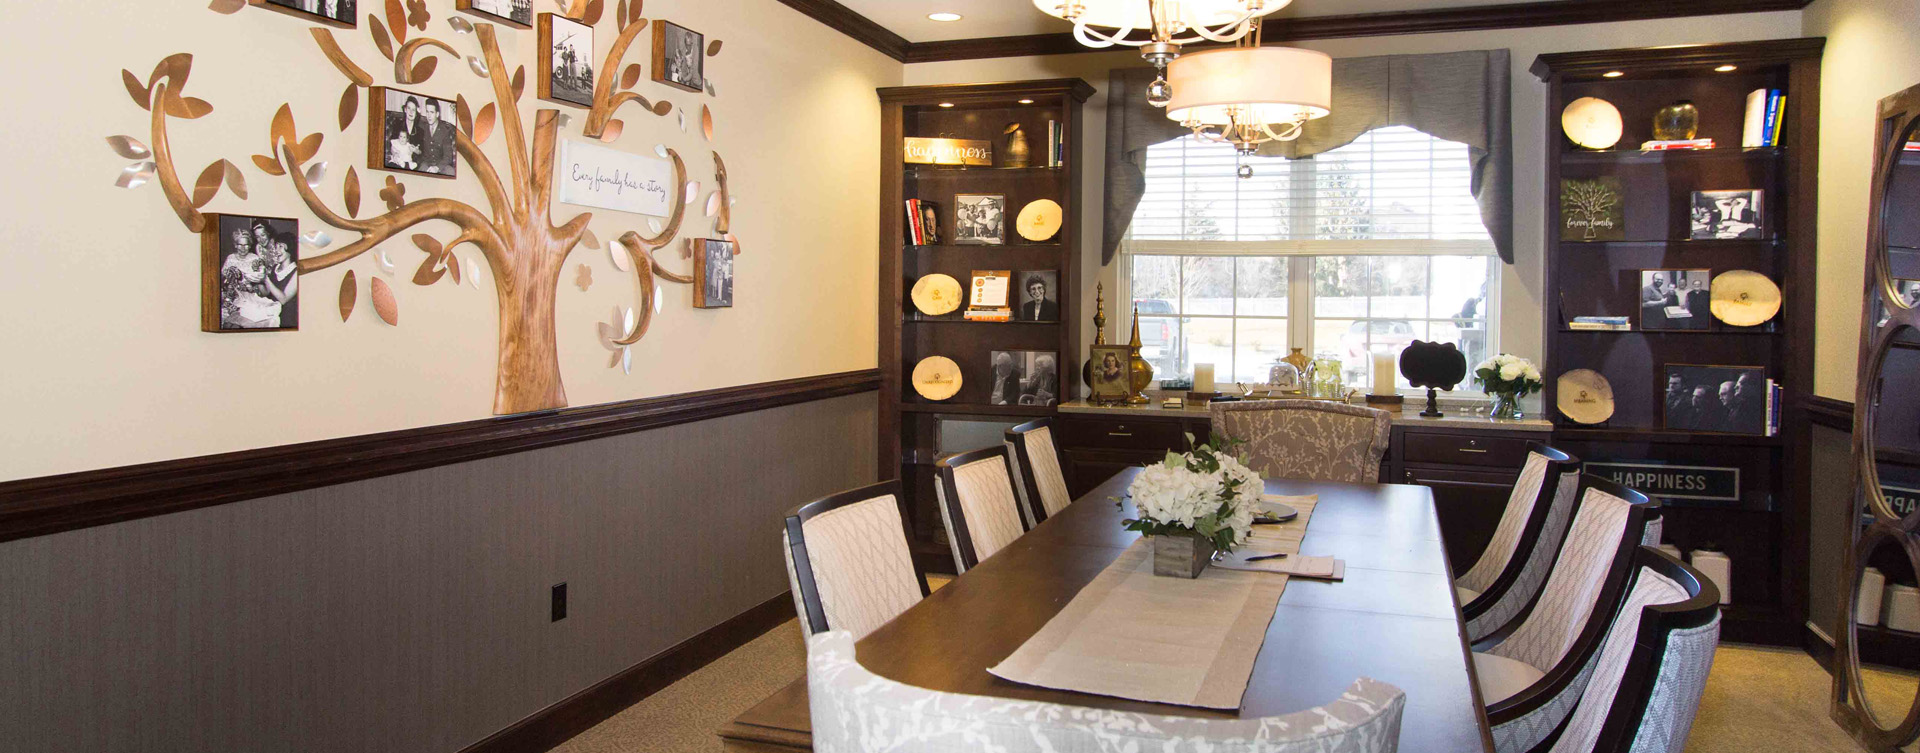 Have fun with themed and holiday meals in the private dining room at Bickford of Gurnee